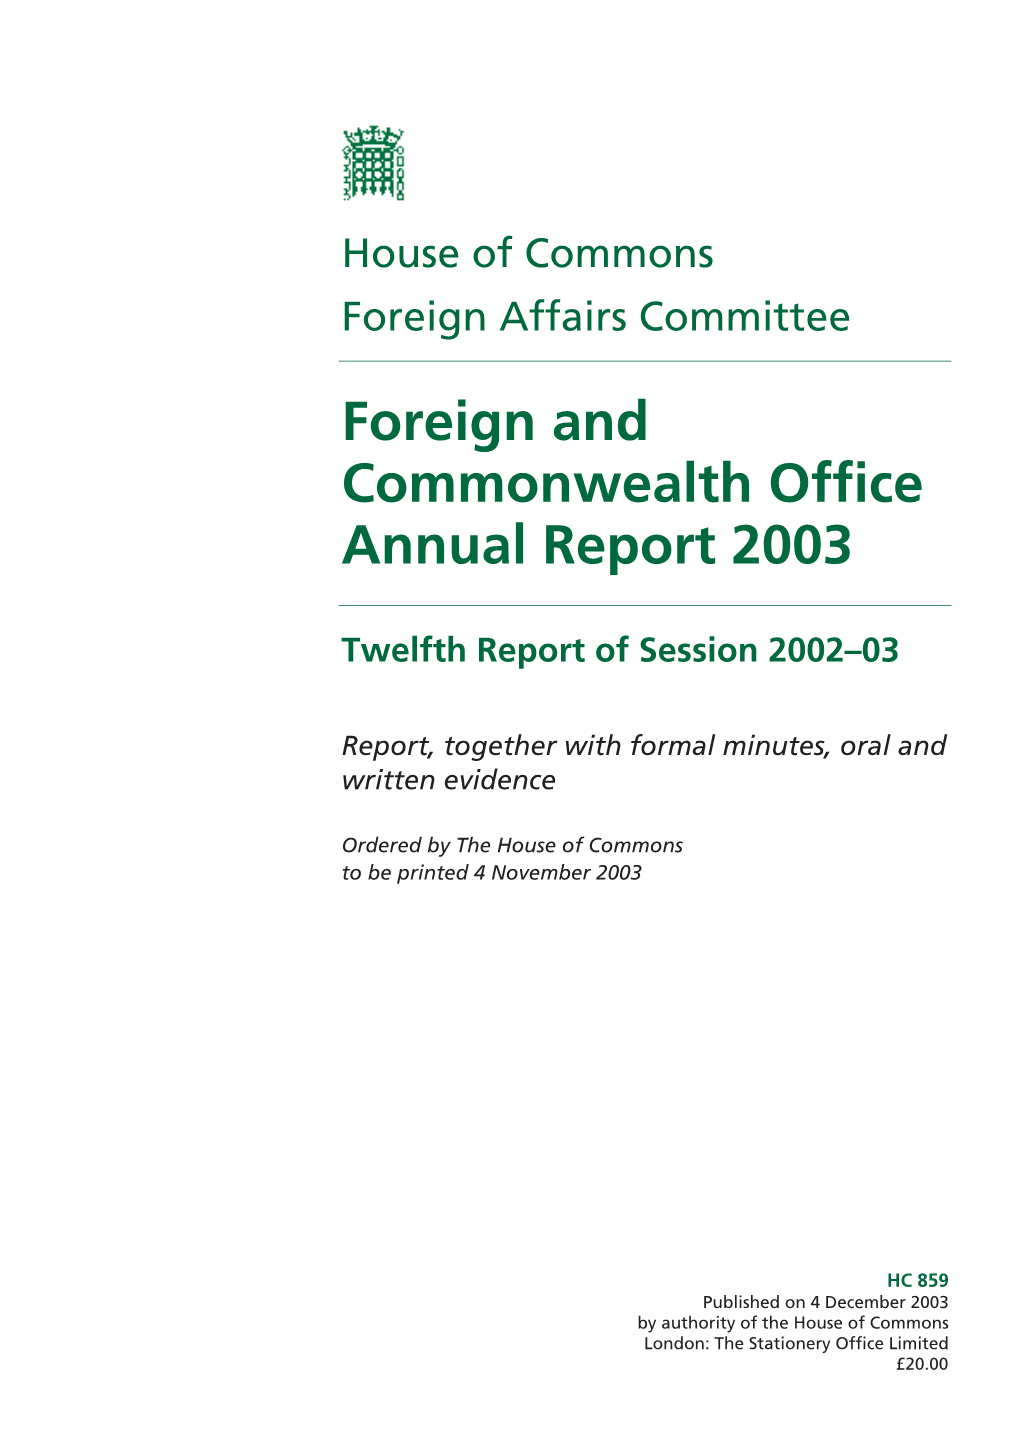 Foreign and Commonwealth Office Annual Report 2003